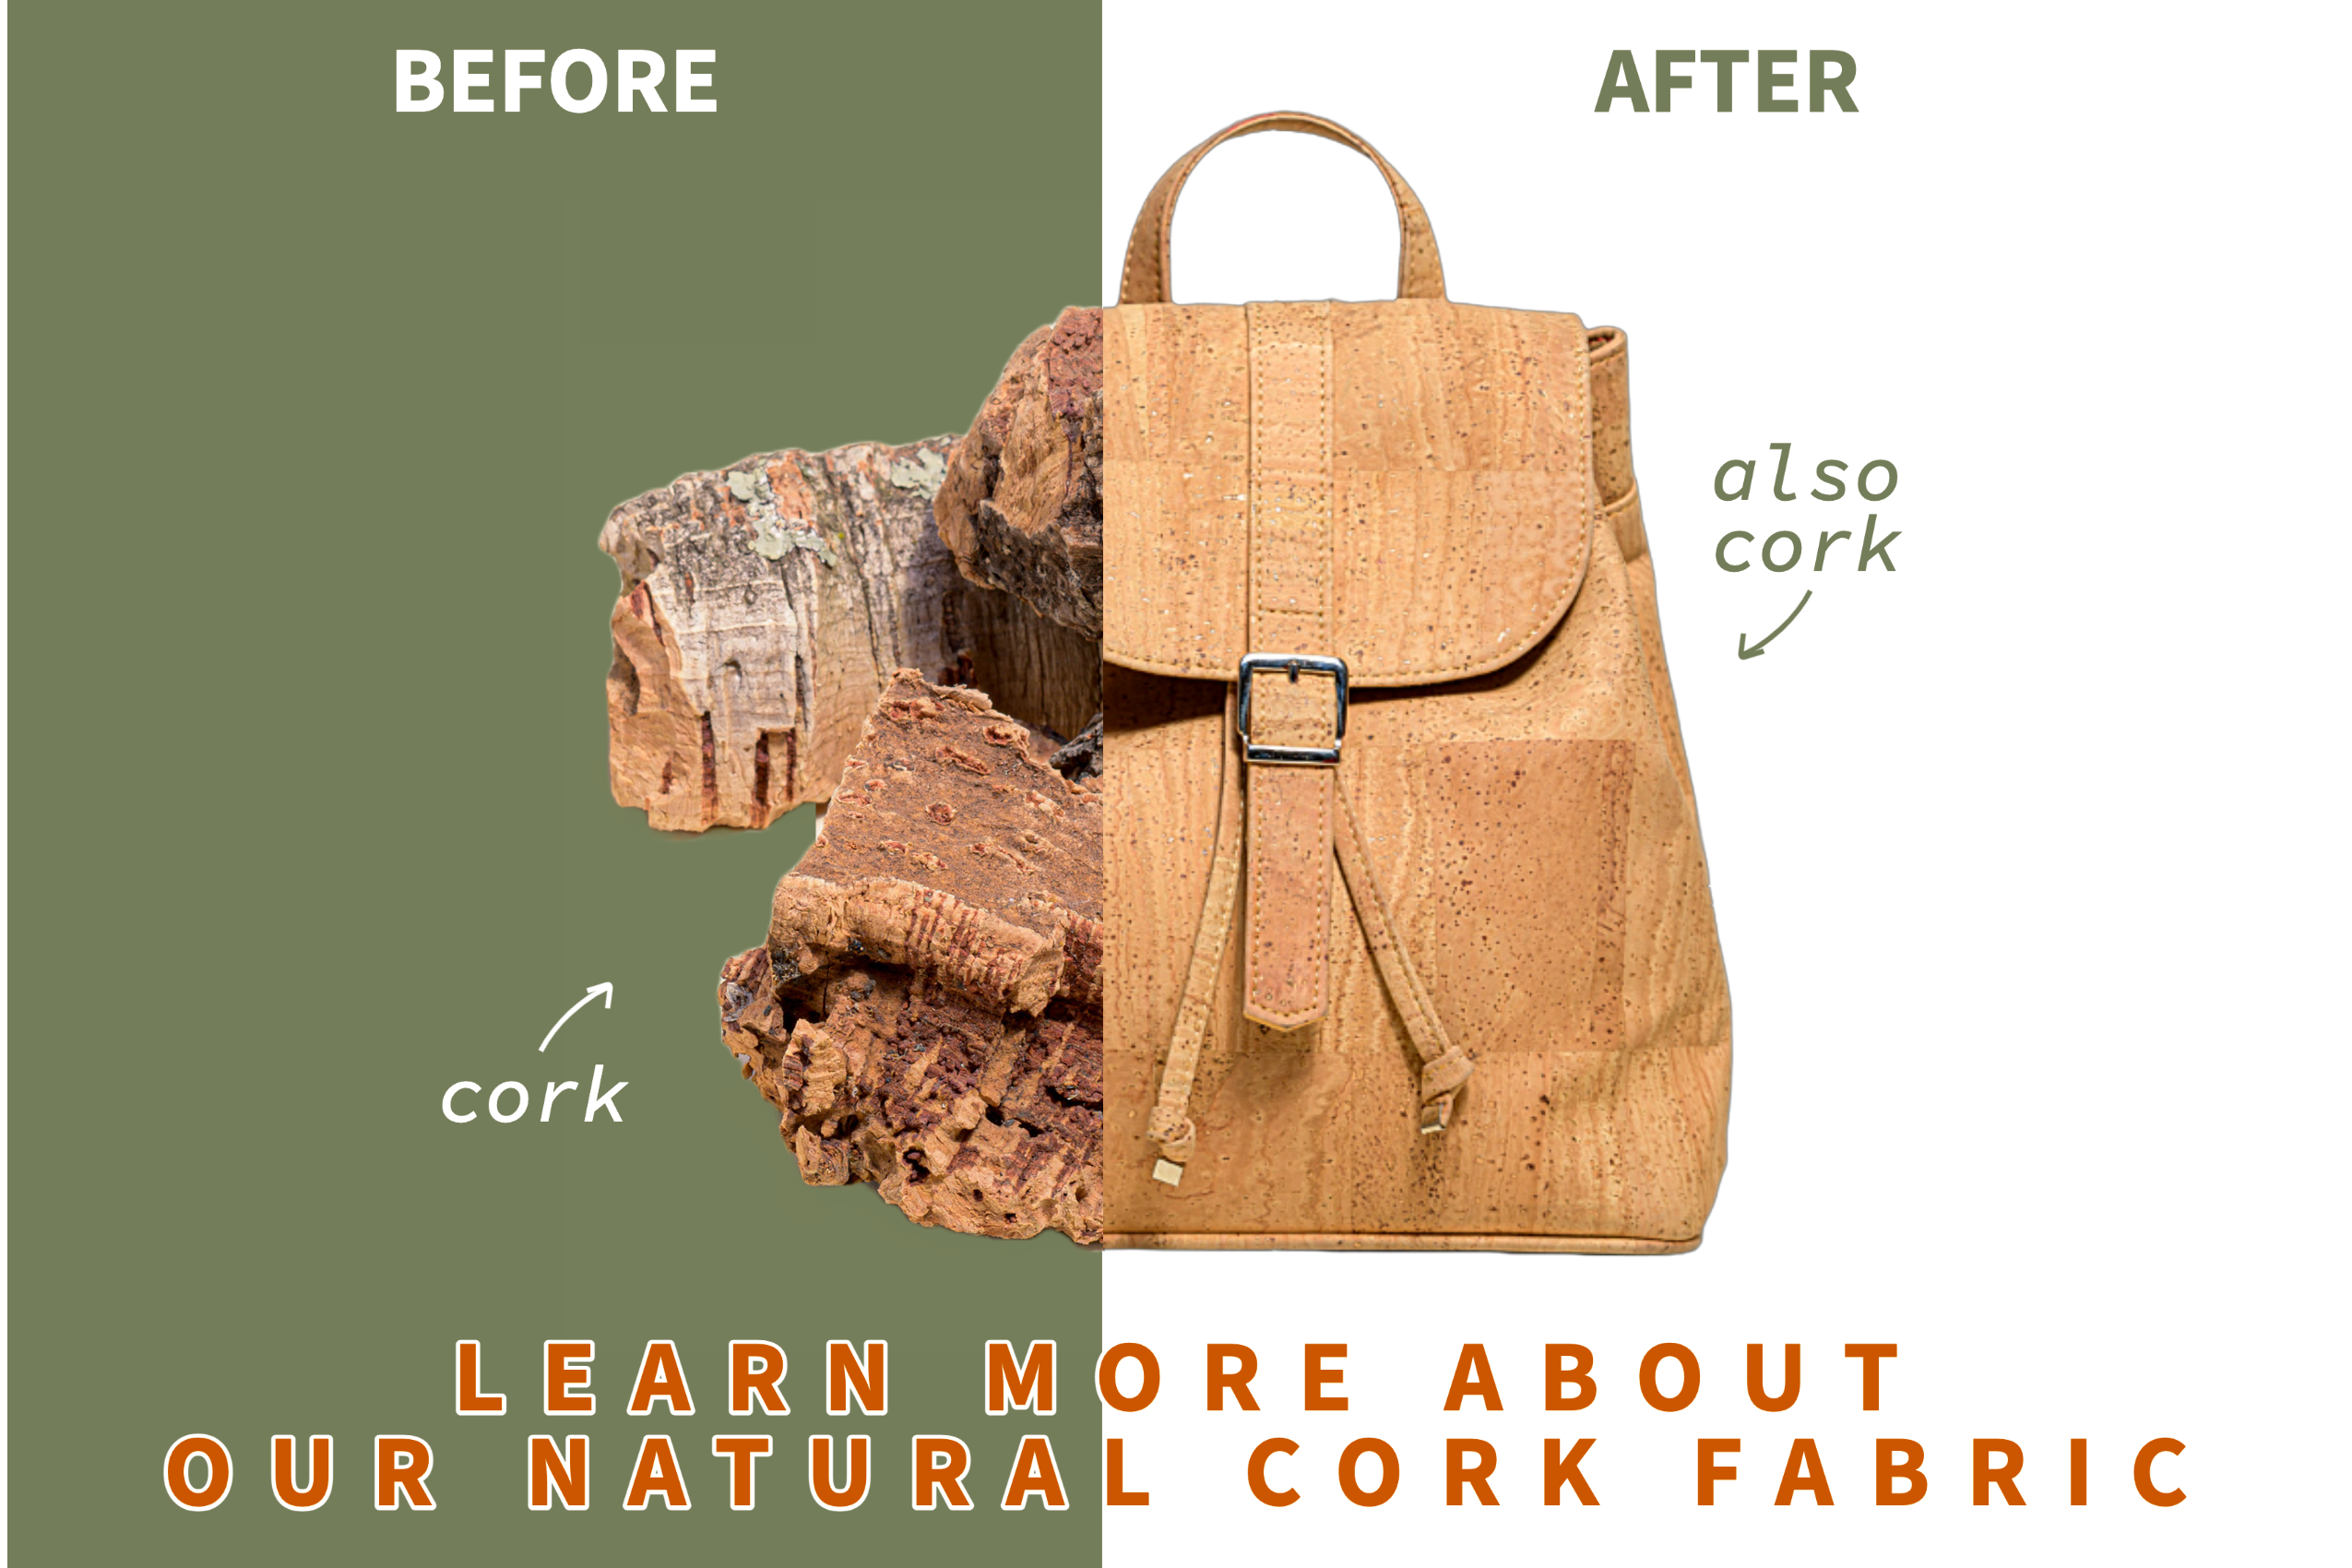 Load video: Cork Fabric: The Sustainable, Vegan, Responsible Choice. The process to create our natural cork fabric.